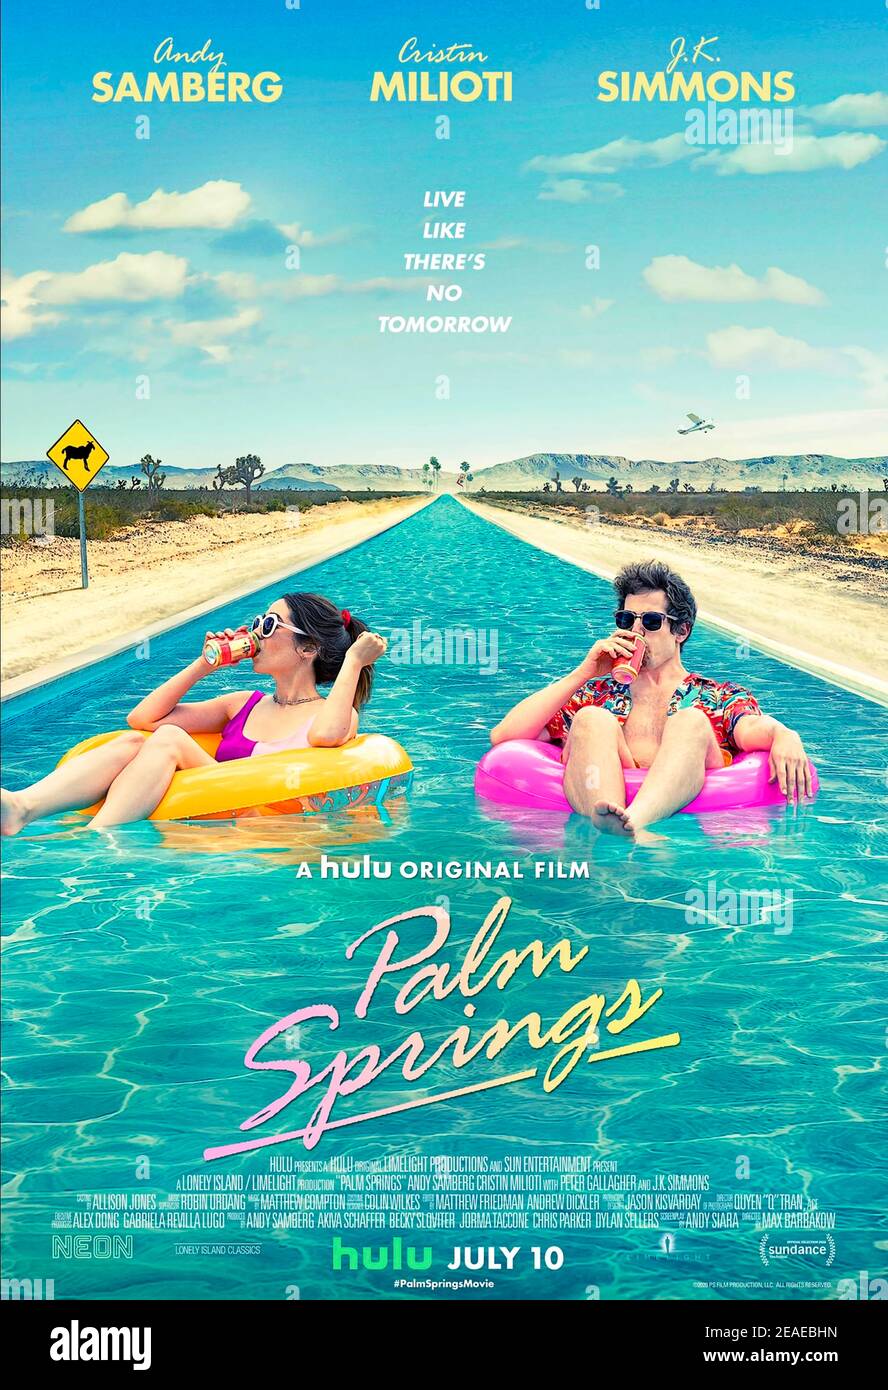 Palm Springs (2020) directed by Max Barbakow and starring Andy Samberg and Cristin Milioti as wedding attendees in Palm Springs who find themselves unable to leave. Stock Photo